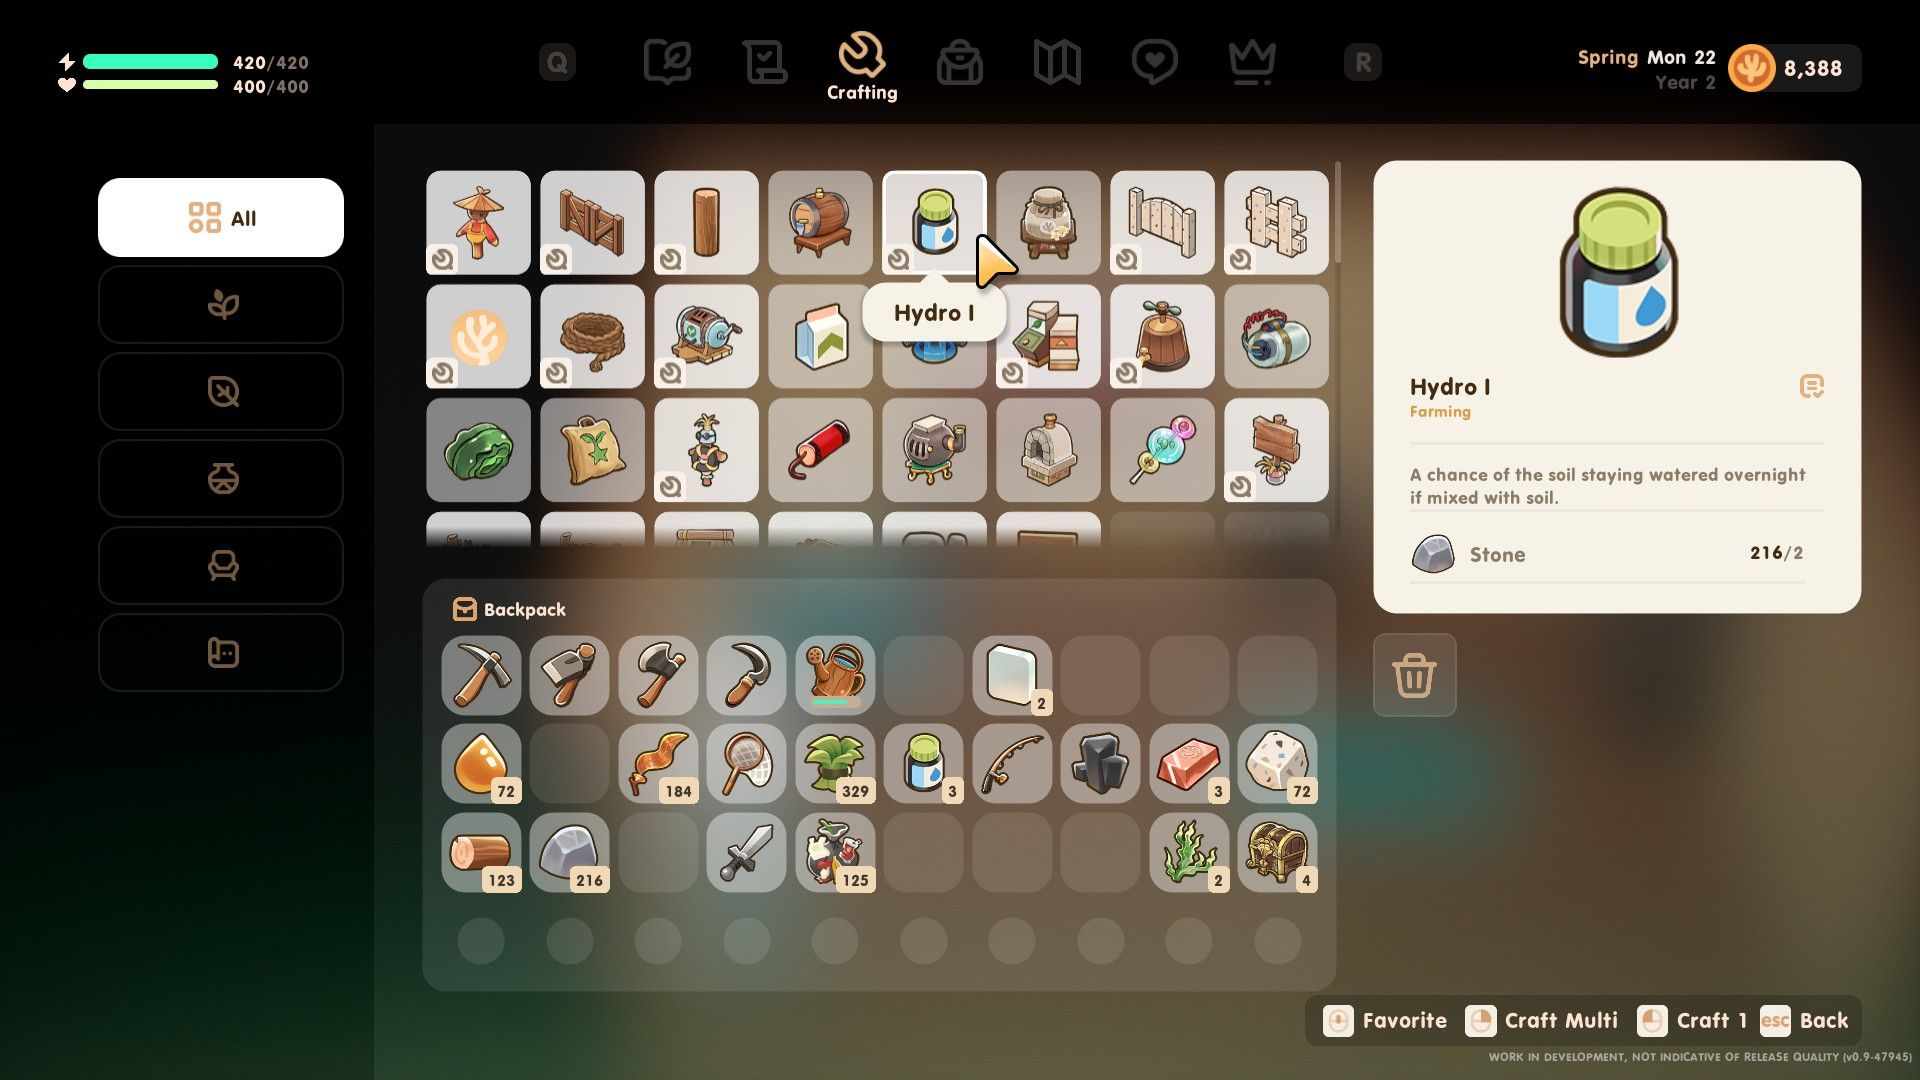 You can craft items such as Hydro 1 and fertiliser from the crafting menu in Coral Island